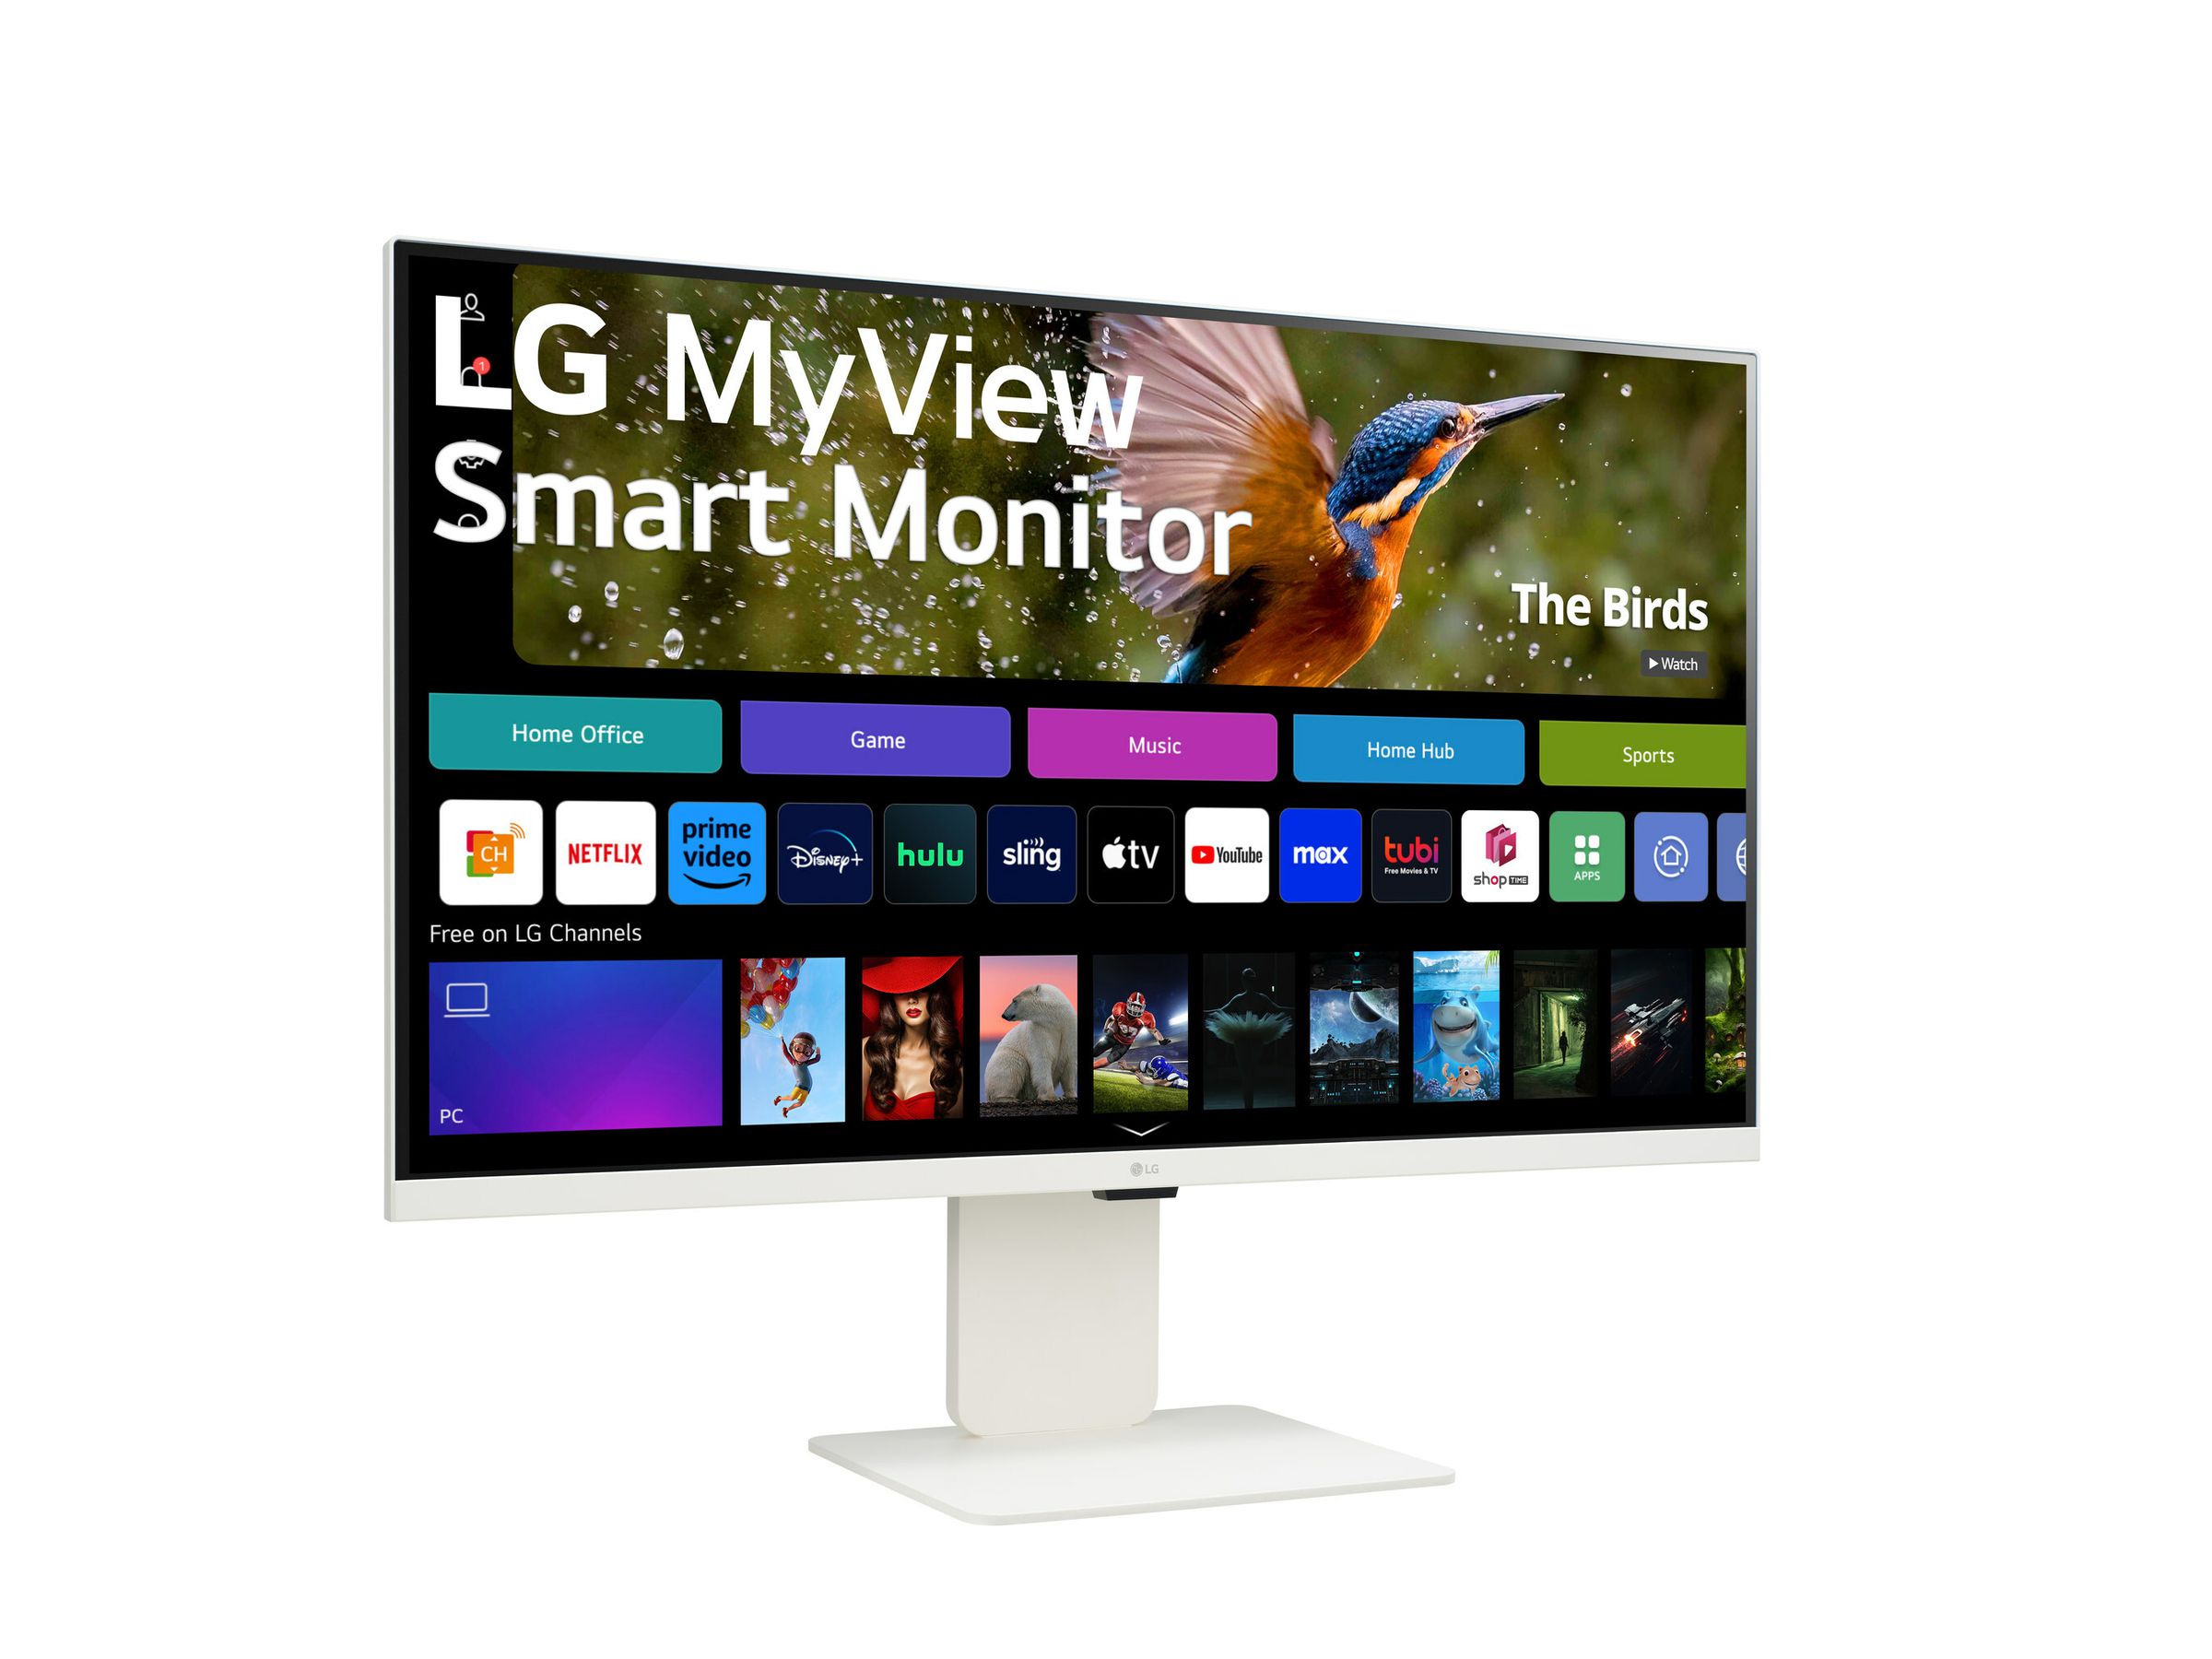 An LG MyView Smart Monitor on a white background.